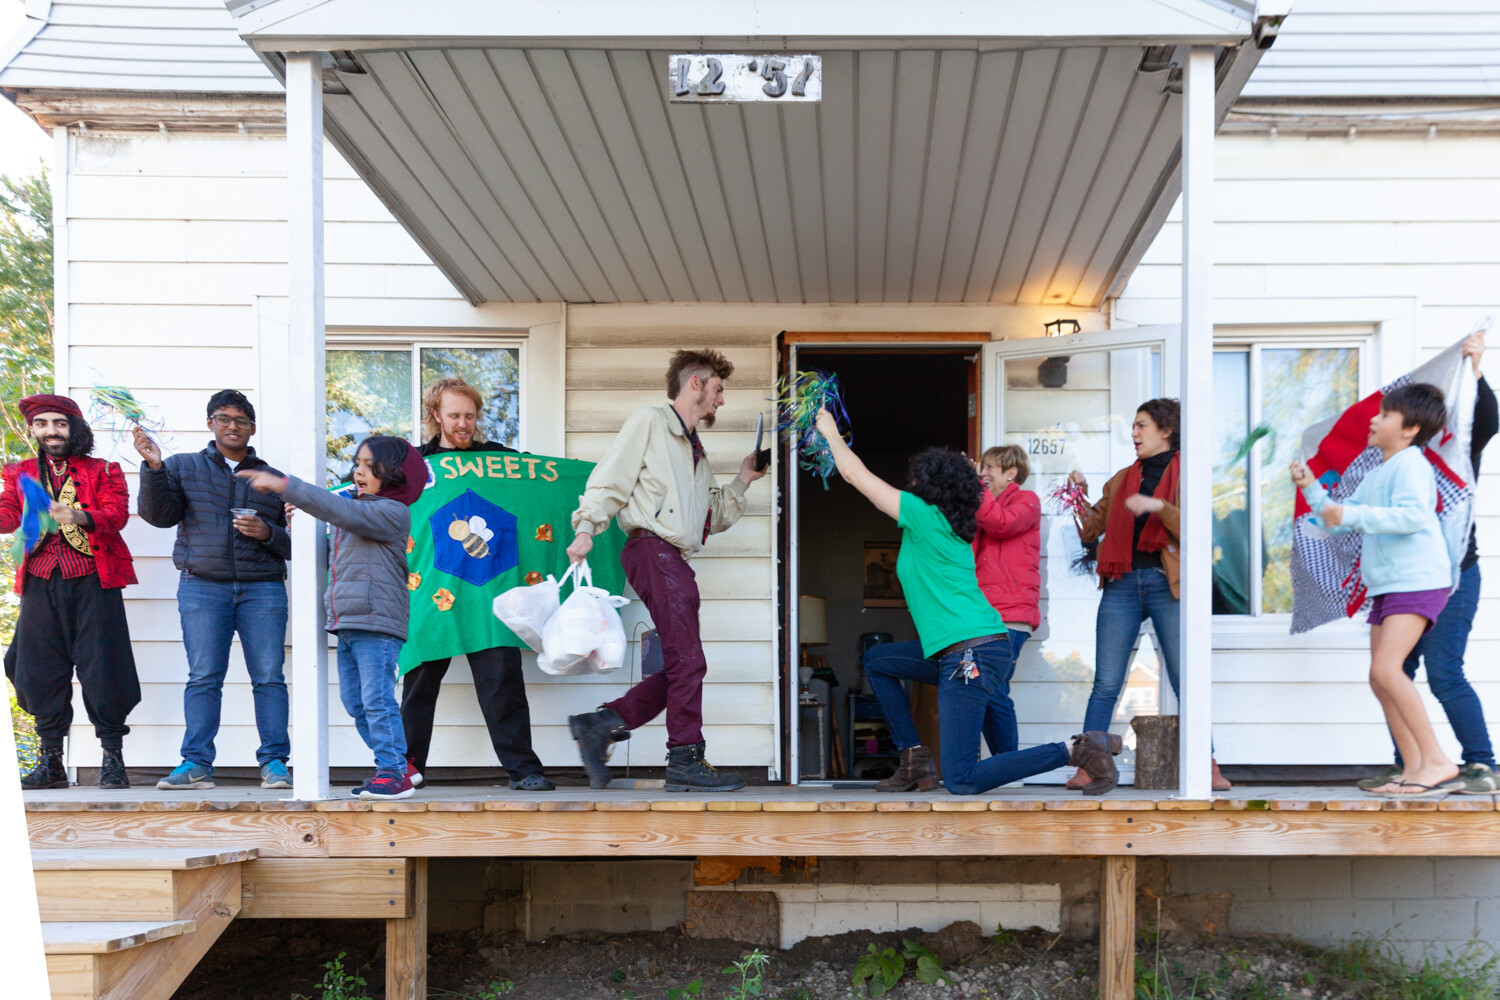 A group of people stand together on the porch of a house.